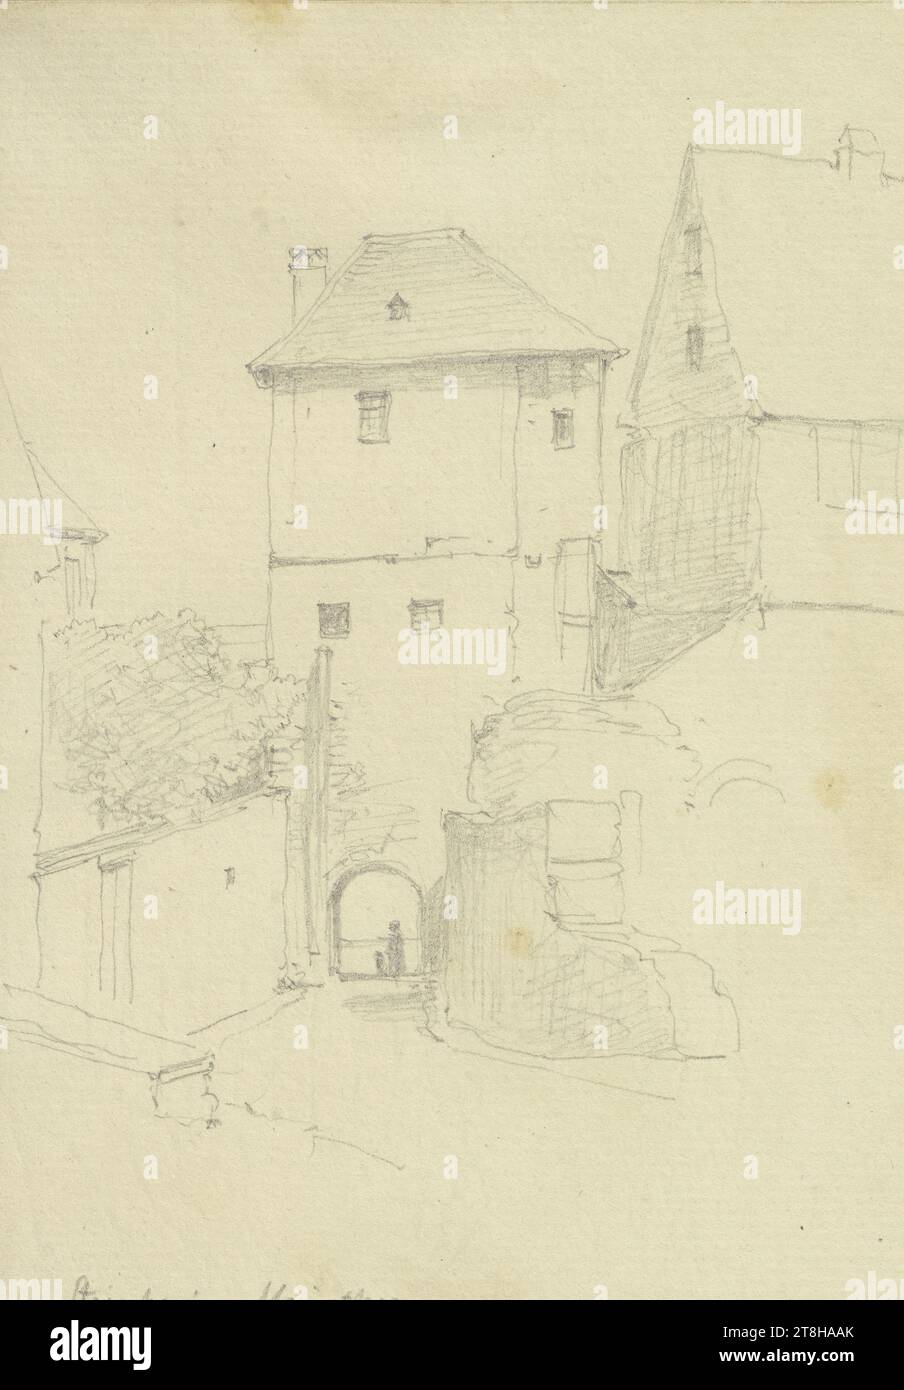 CARL THEODOR REIFFENSTEIN, The Main Gate in Steinheim, July 7, 1874, sheet, 132 x 94 mm, pencil on vergé paper, The Main Gate in Steinheim, CARL THEODOR REIFFENSTEIN, page, adhesive tapes, volume 32, page 1, part number / total, 1 / 4, HANAU-STEINHEIM AM MAIN, 19TH CENTURY, DRAWING, pencil on vergé paper, GRAPHITE-CLAY MIXTURE, VERGET PAPER, PENCIL DRAWING, GERMAN, ARCHITECTURAL STUDY, TRAVEL STUDY, Dated and inscribed lower right, in pencil, Steinheim. Mainthor. / July 7, 1874., Numbered on the page above the drawing, in black pen Stock Photo